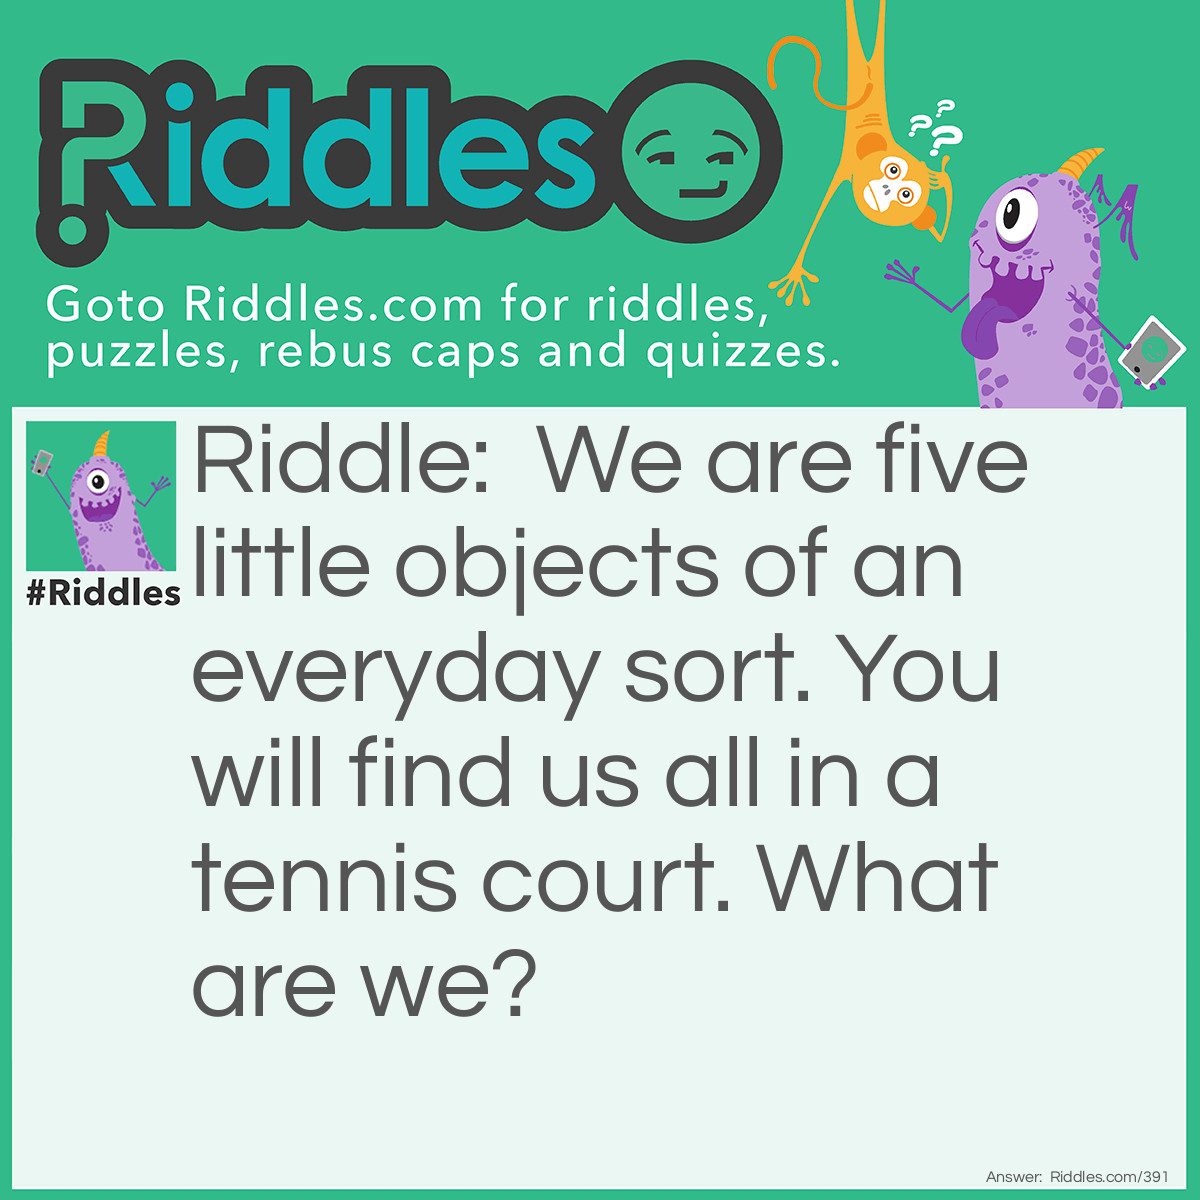 Riddle: We are five little objects of an everyday sort. You will find us all in a tennis court. What are we? Answer: Vowels.